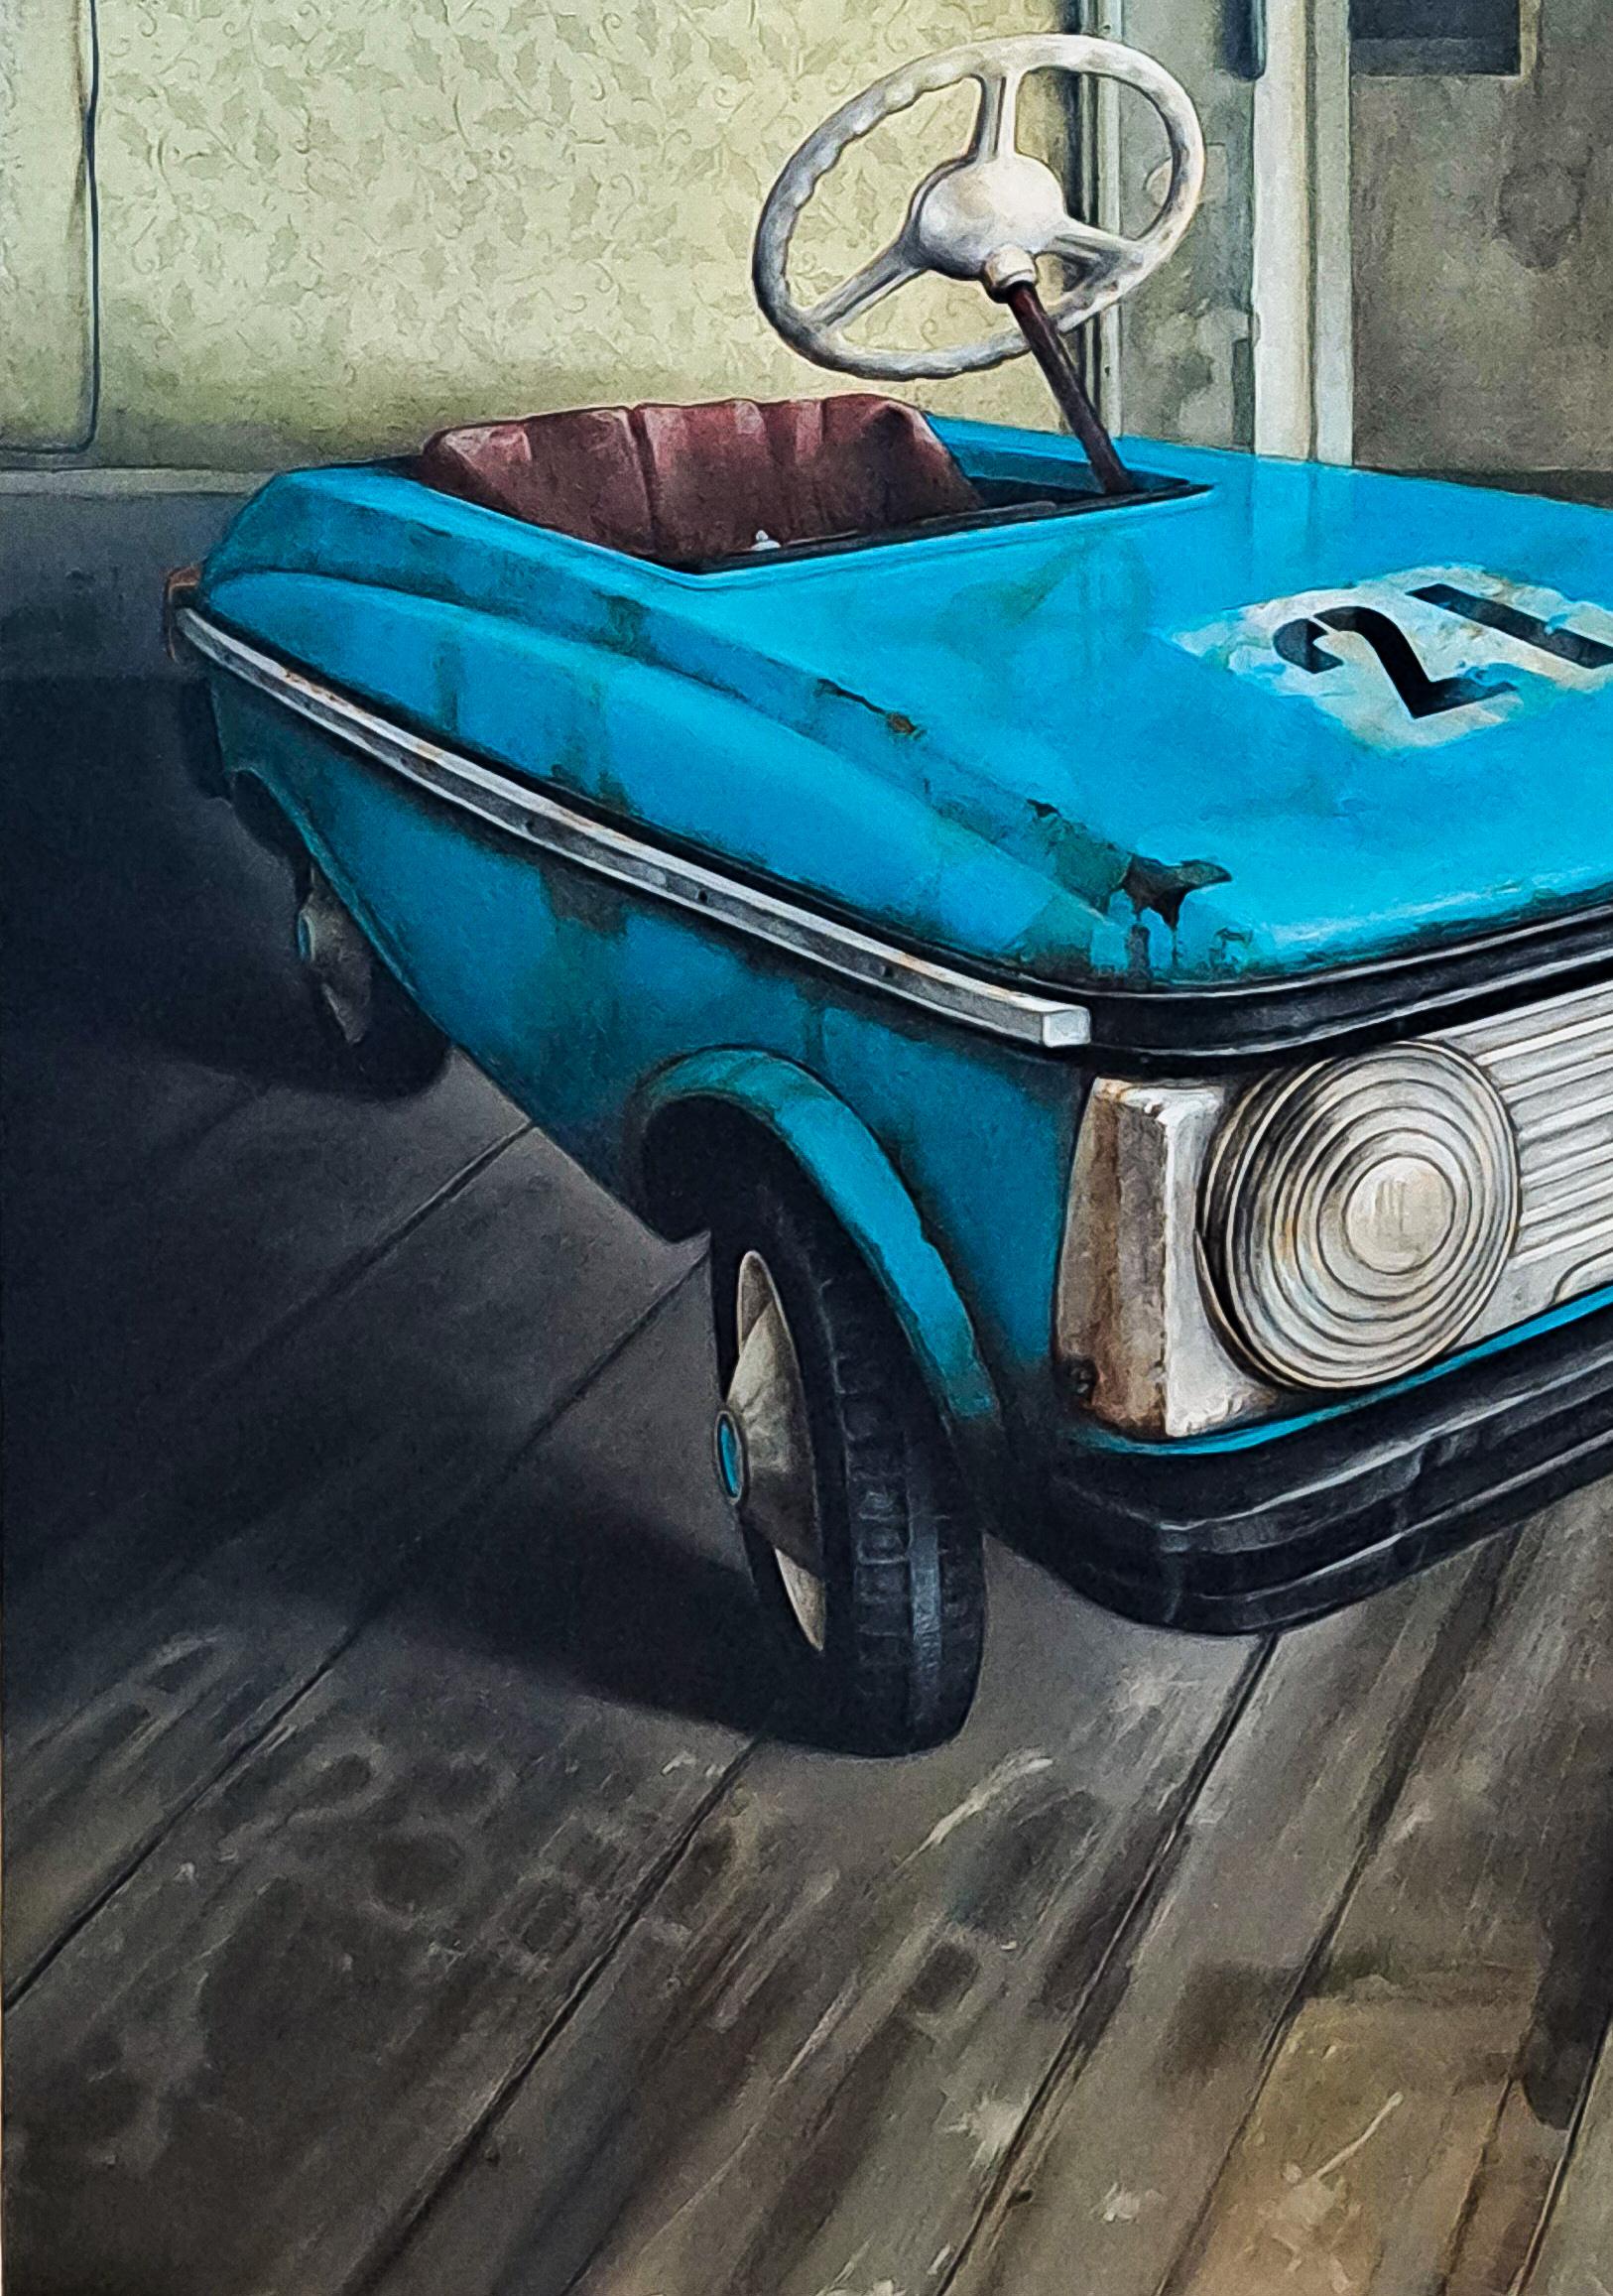 Cherished memories from his childhood growing up in Ukraine often become the subjects of Dmitry Yuzefovich’s beautiful paintings. As a little boy, he recalled the joy he felt behind the wheel of this toy car. It appears here in bright blue, a pair